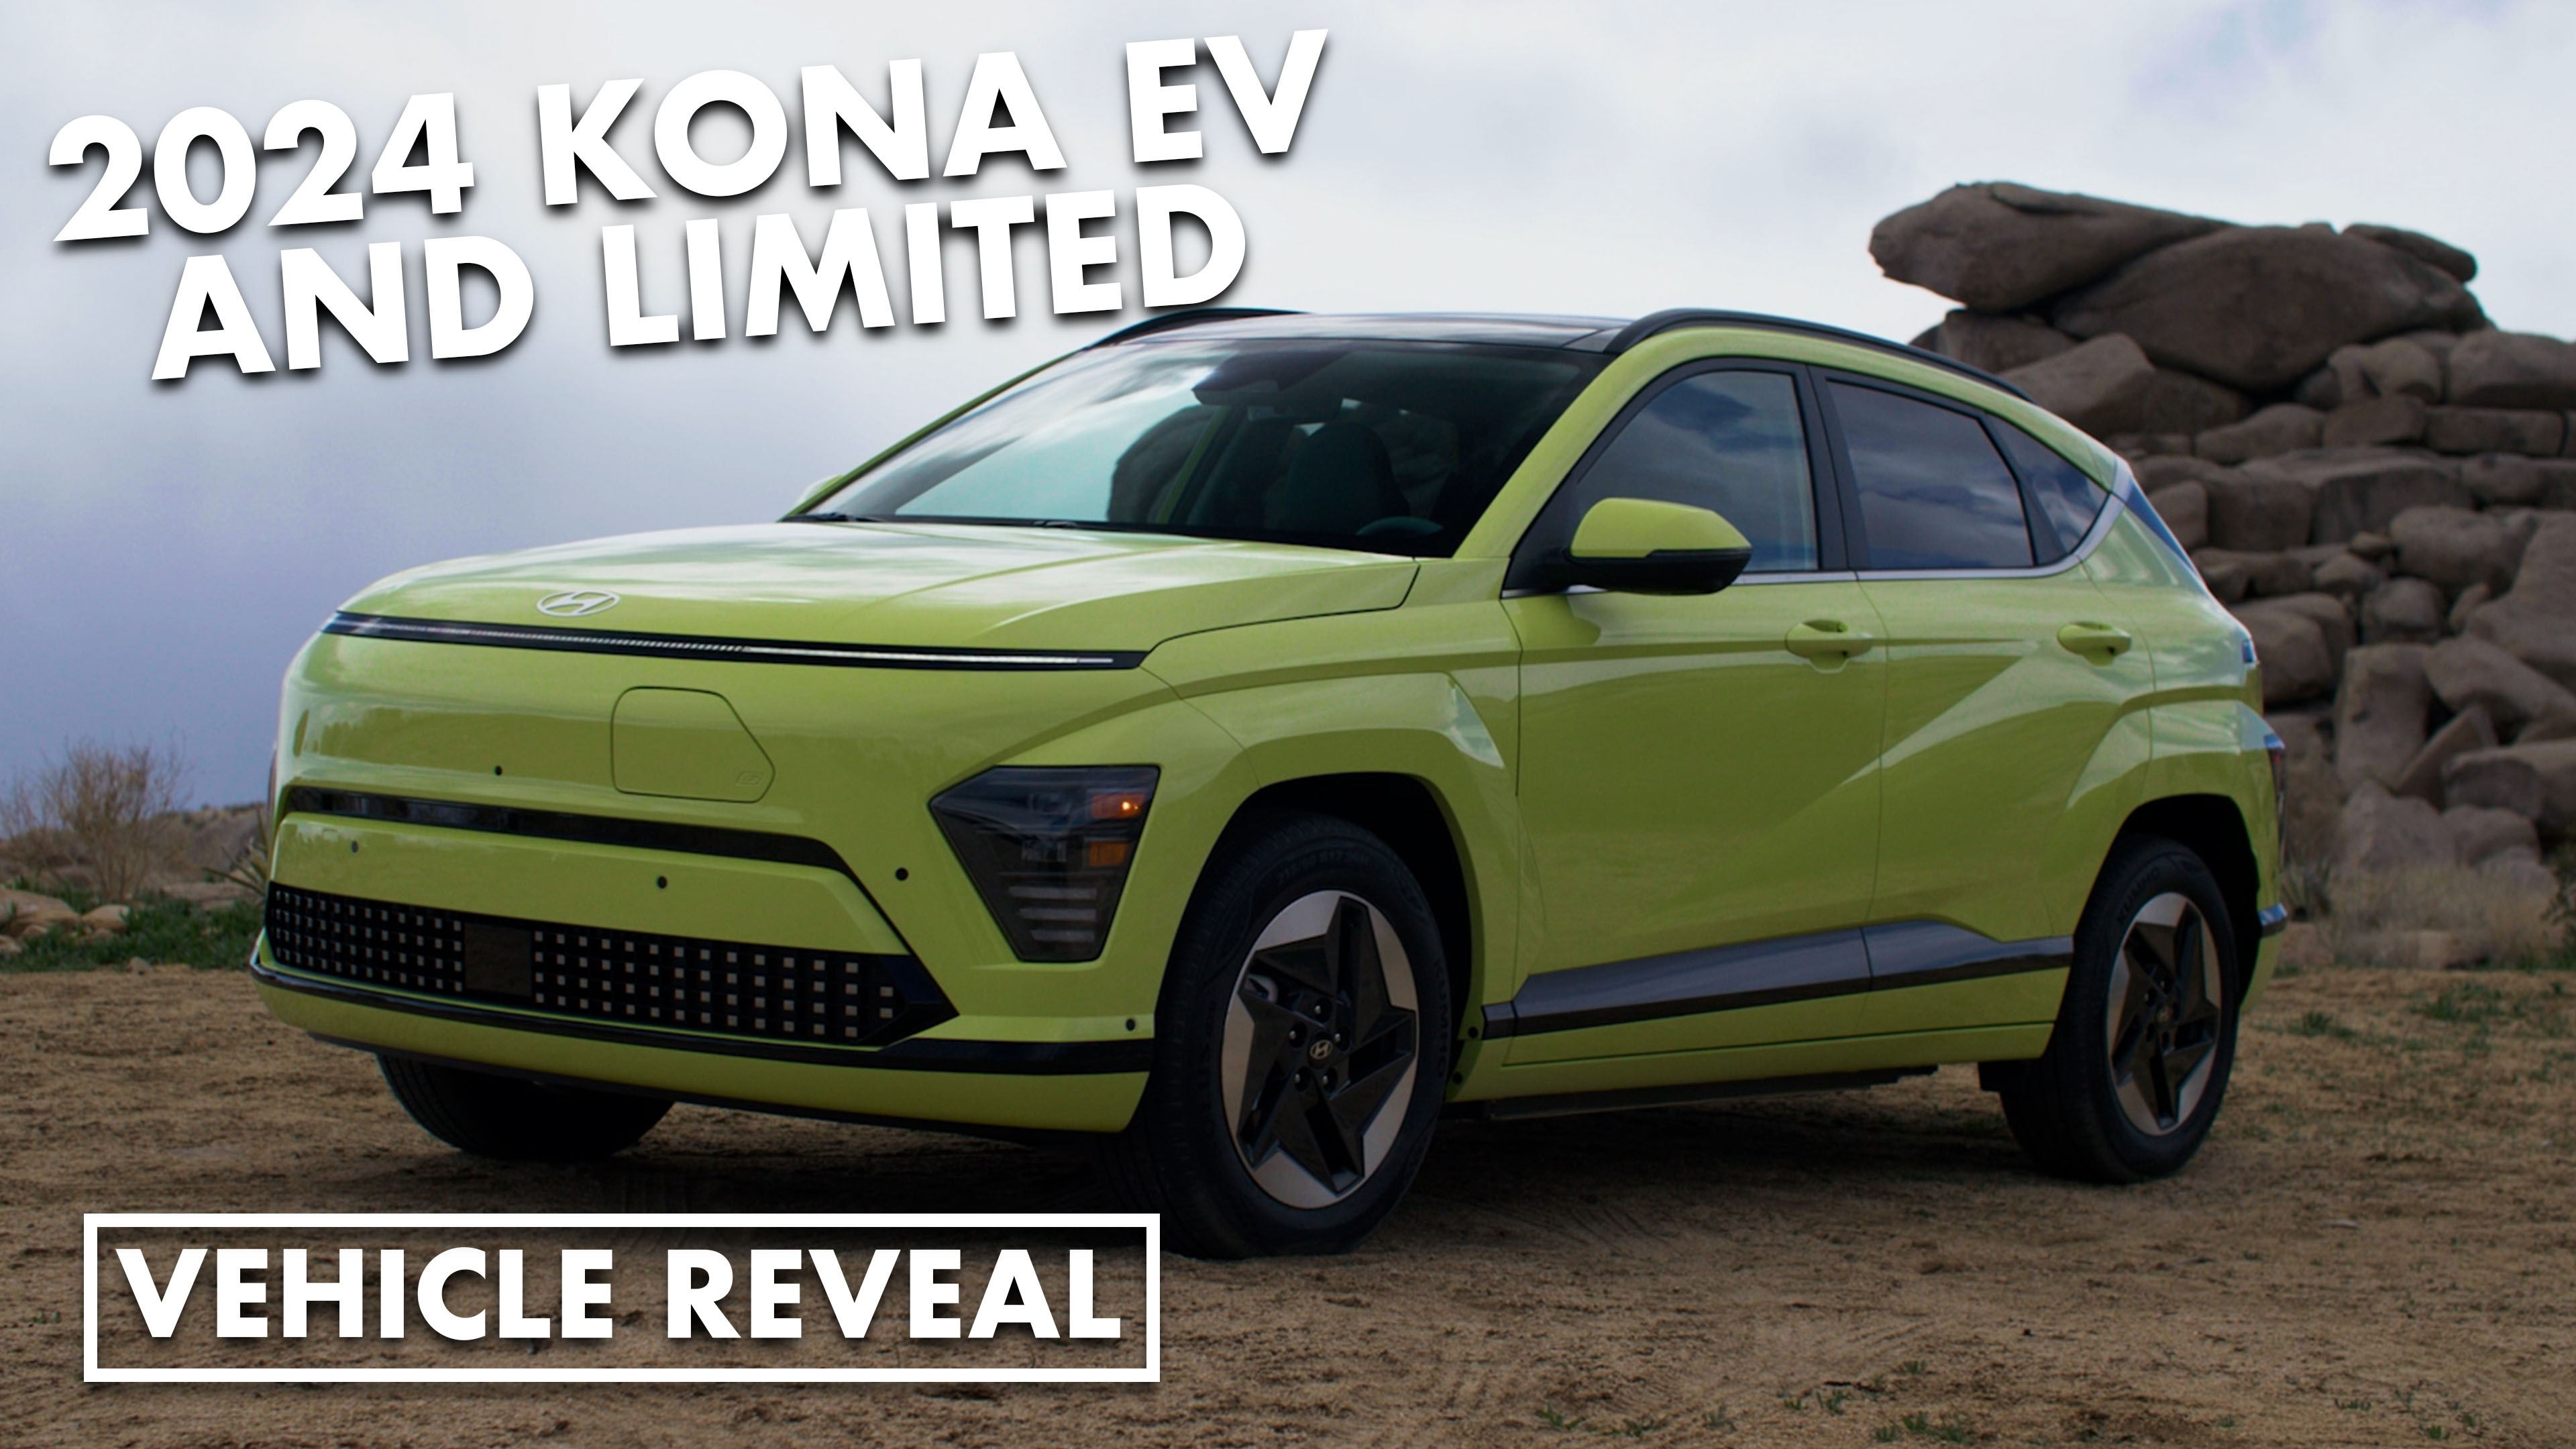 2024 Hyundai Kona electric and gas variants debut at the 2023 New York Auto Show